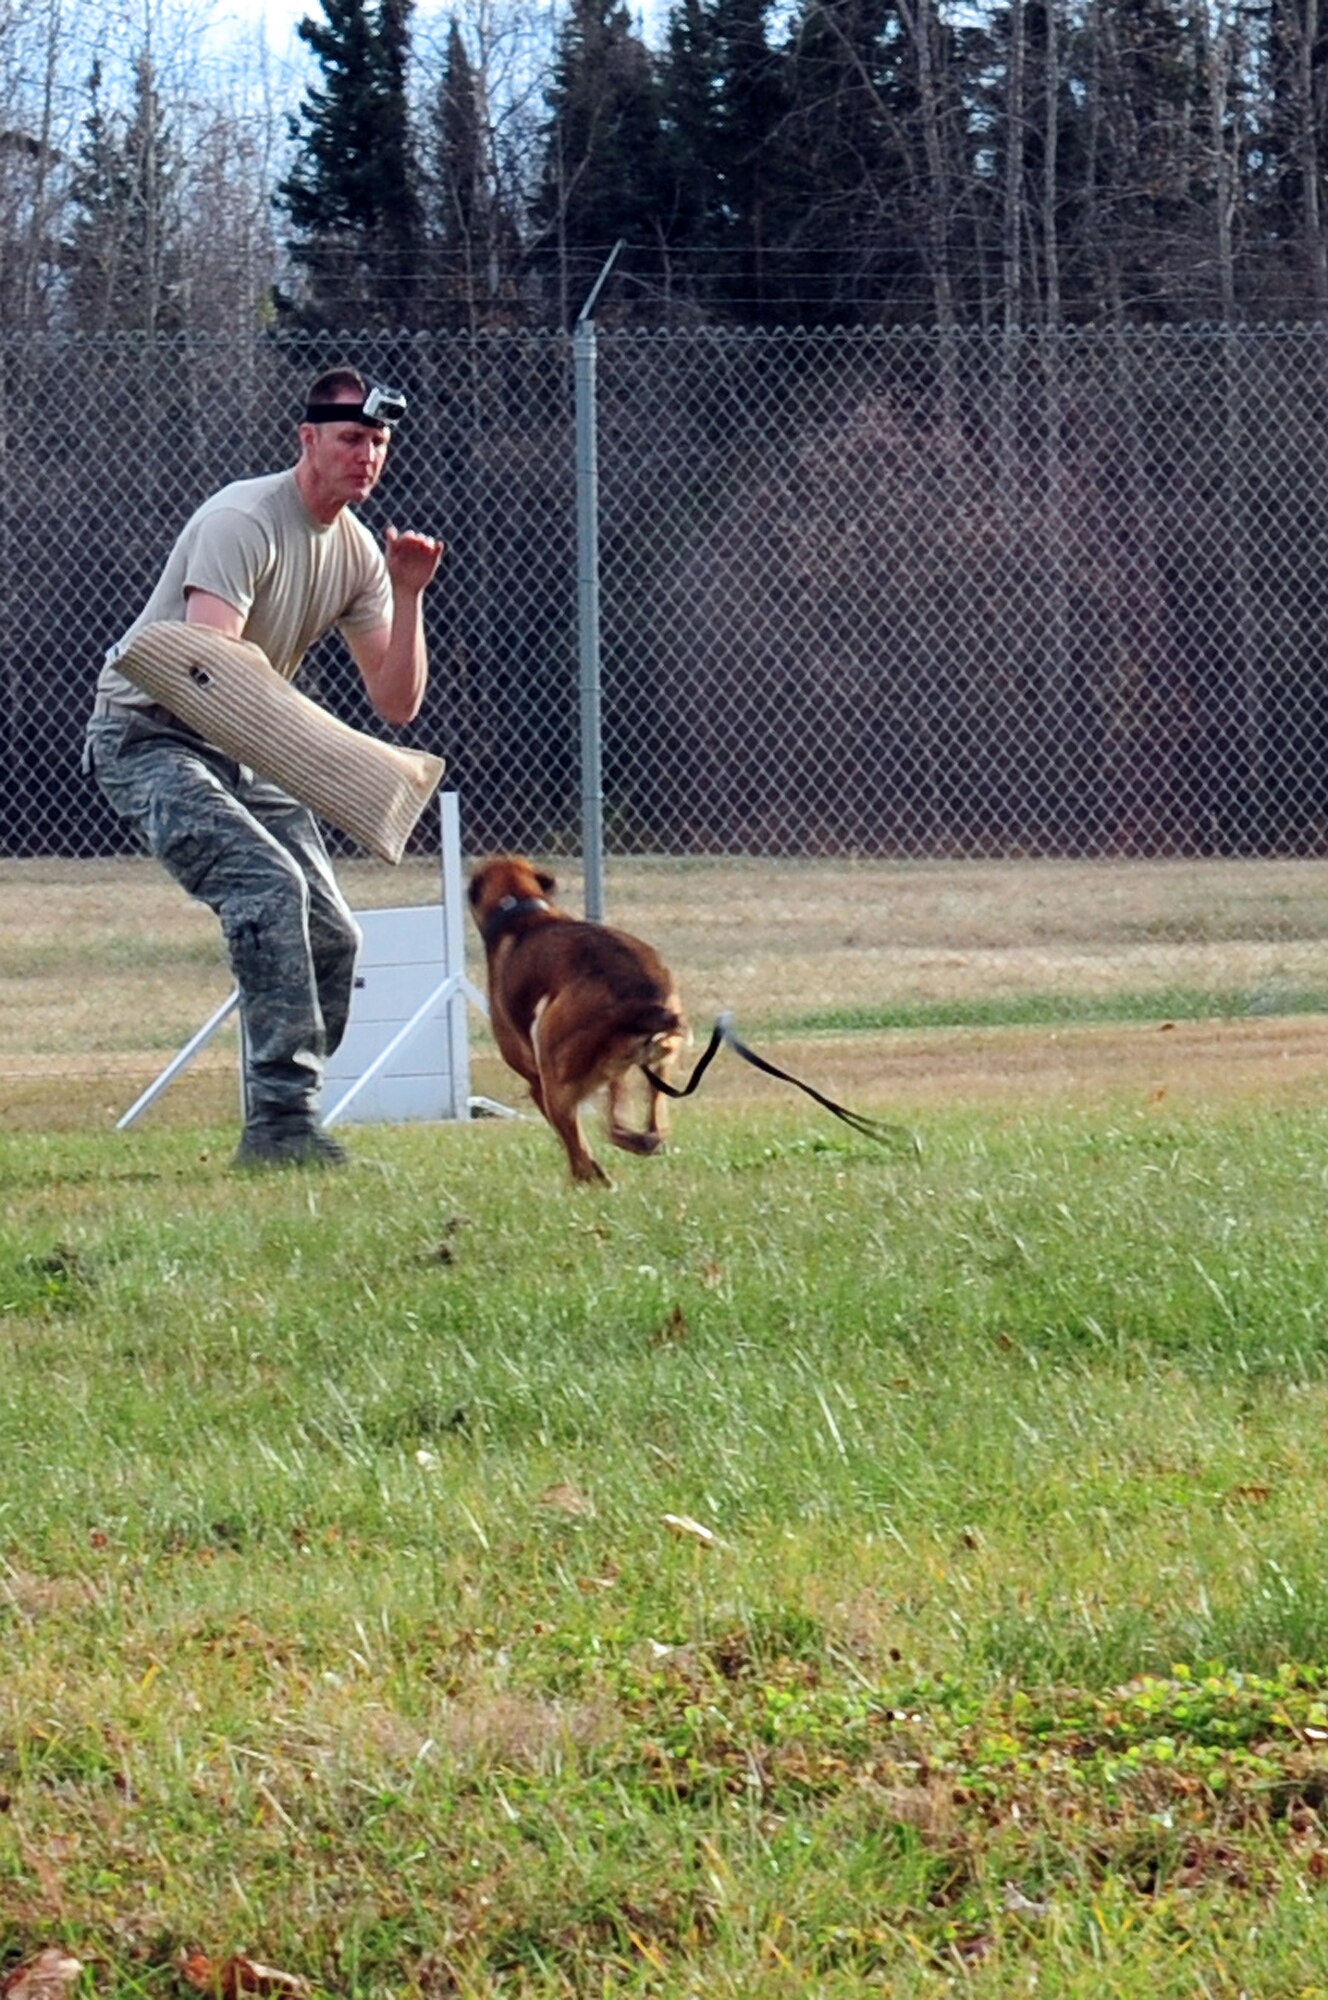 Azza, 354th Security Forces Squadron military working dog, prepares to attack Staff Sgt. Nicholas Drake, 354th SFS MWD handler, as part of a training exercise. Azza is an 8-year-old Belgian Malinois and recently returned from a deployment to Afghanistan. (U.S. Air Force photo/Airman 1st Class Zachary Perras)